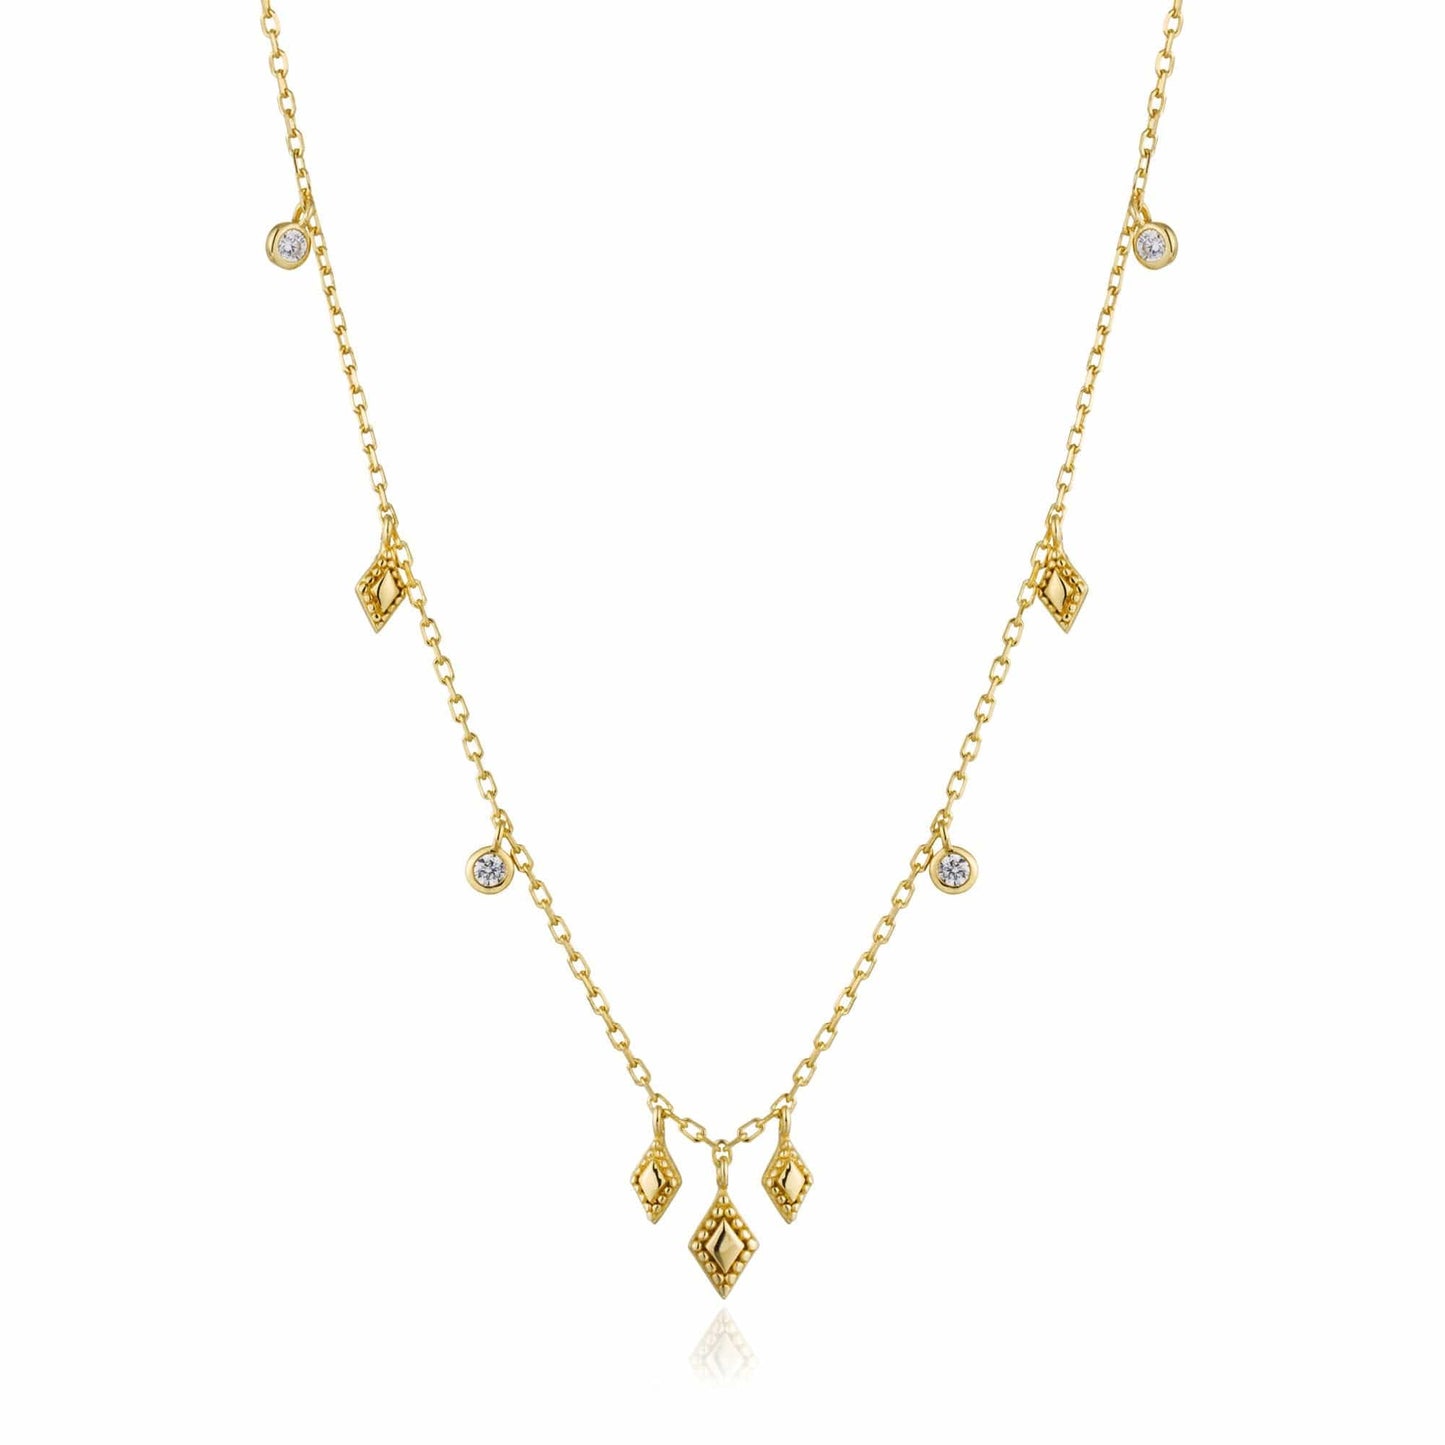 NKL-GPL Gold Bohemia Necklace